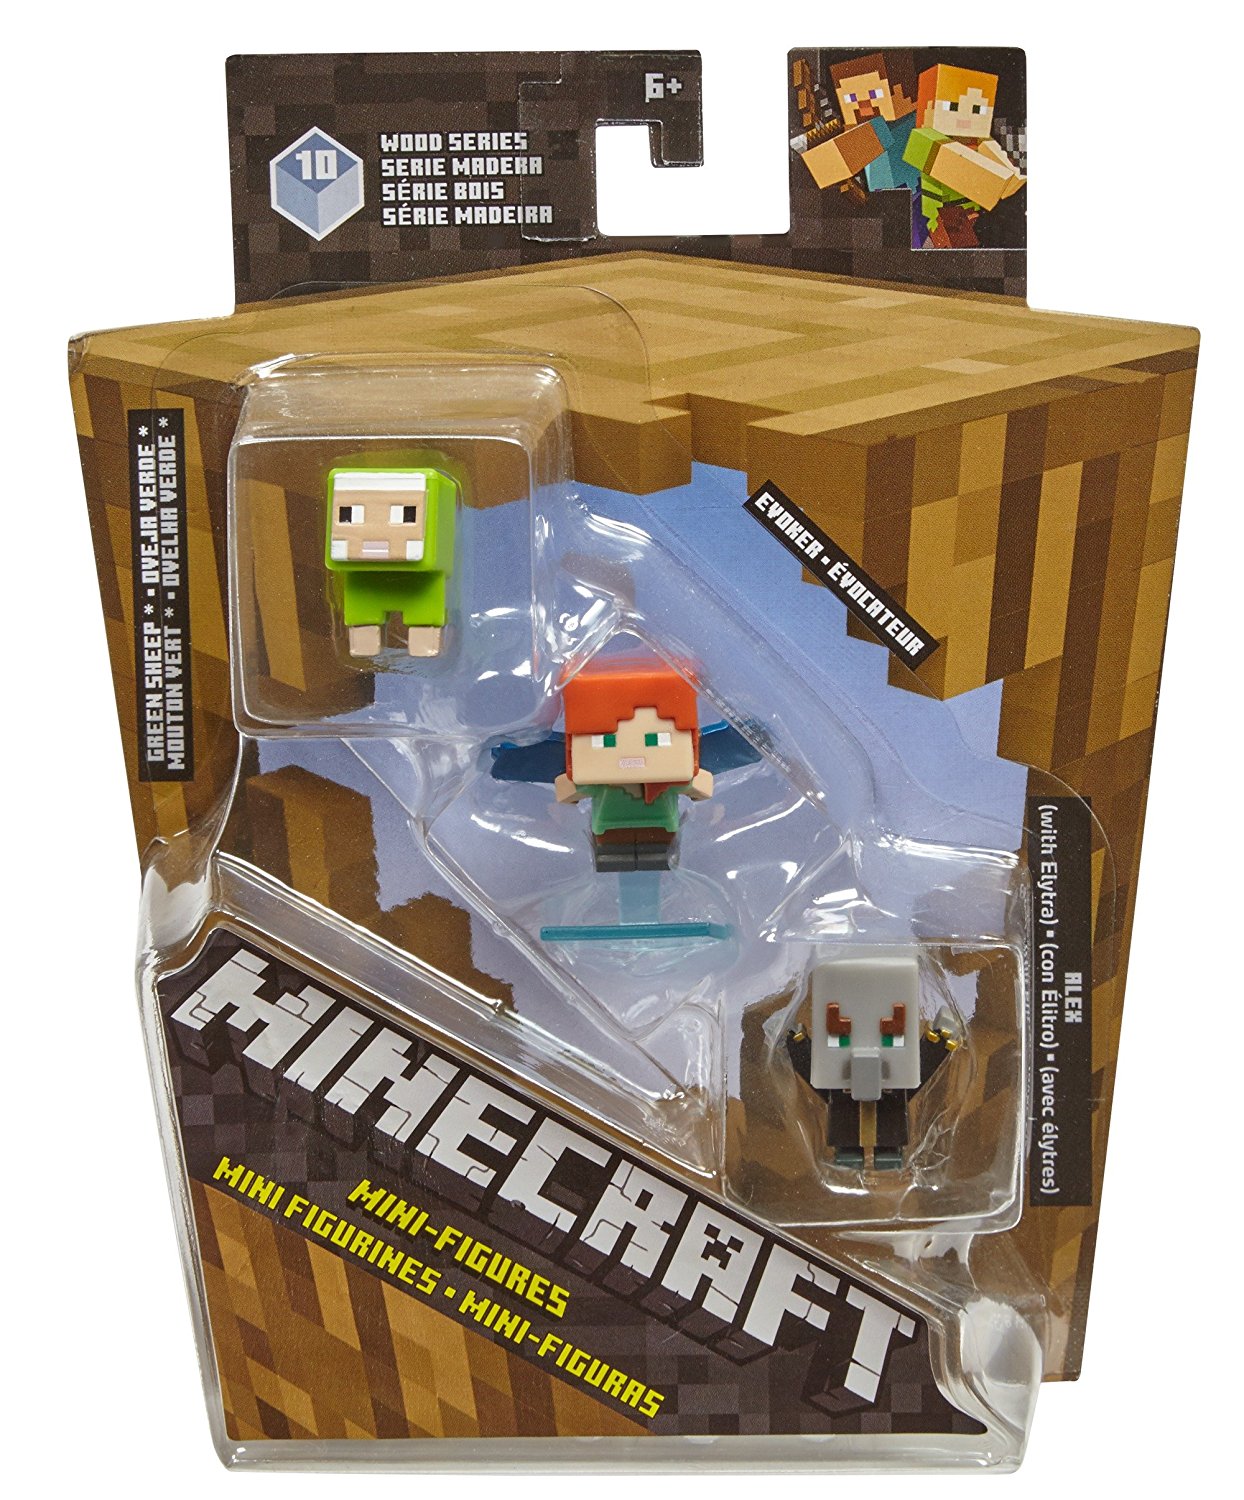 NEW Minecraft Mini-Figures Wood Series 10 Set of 4 Blind Boxes #921